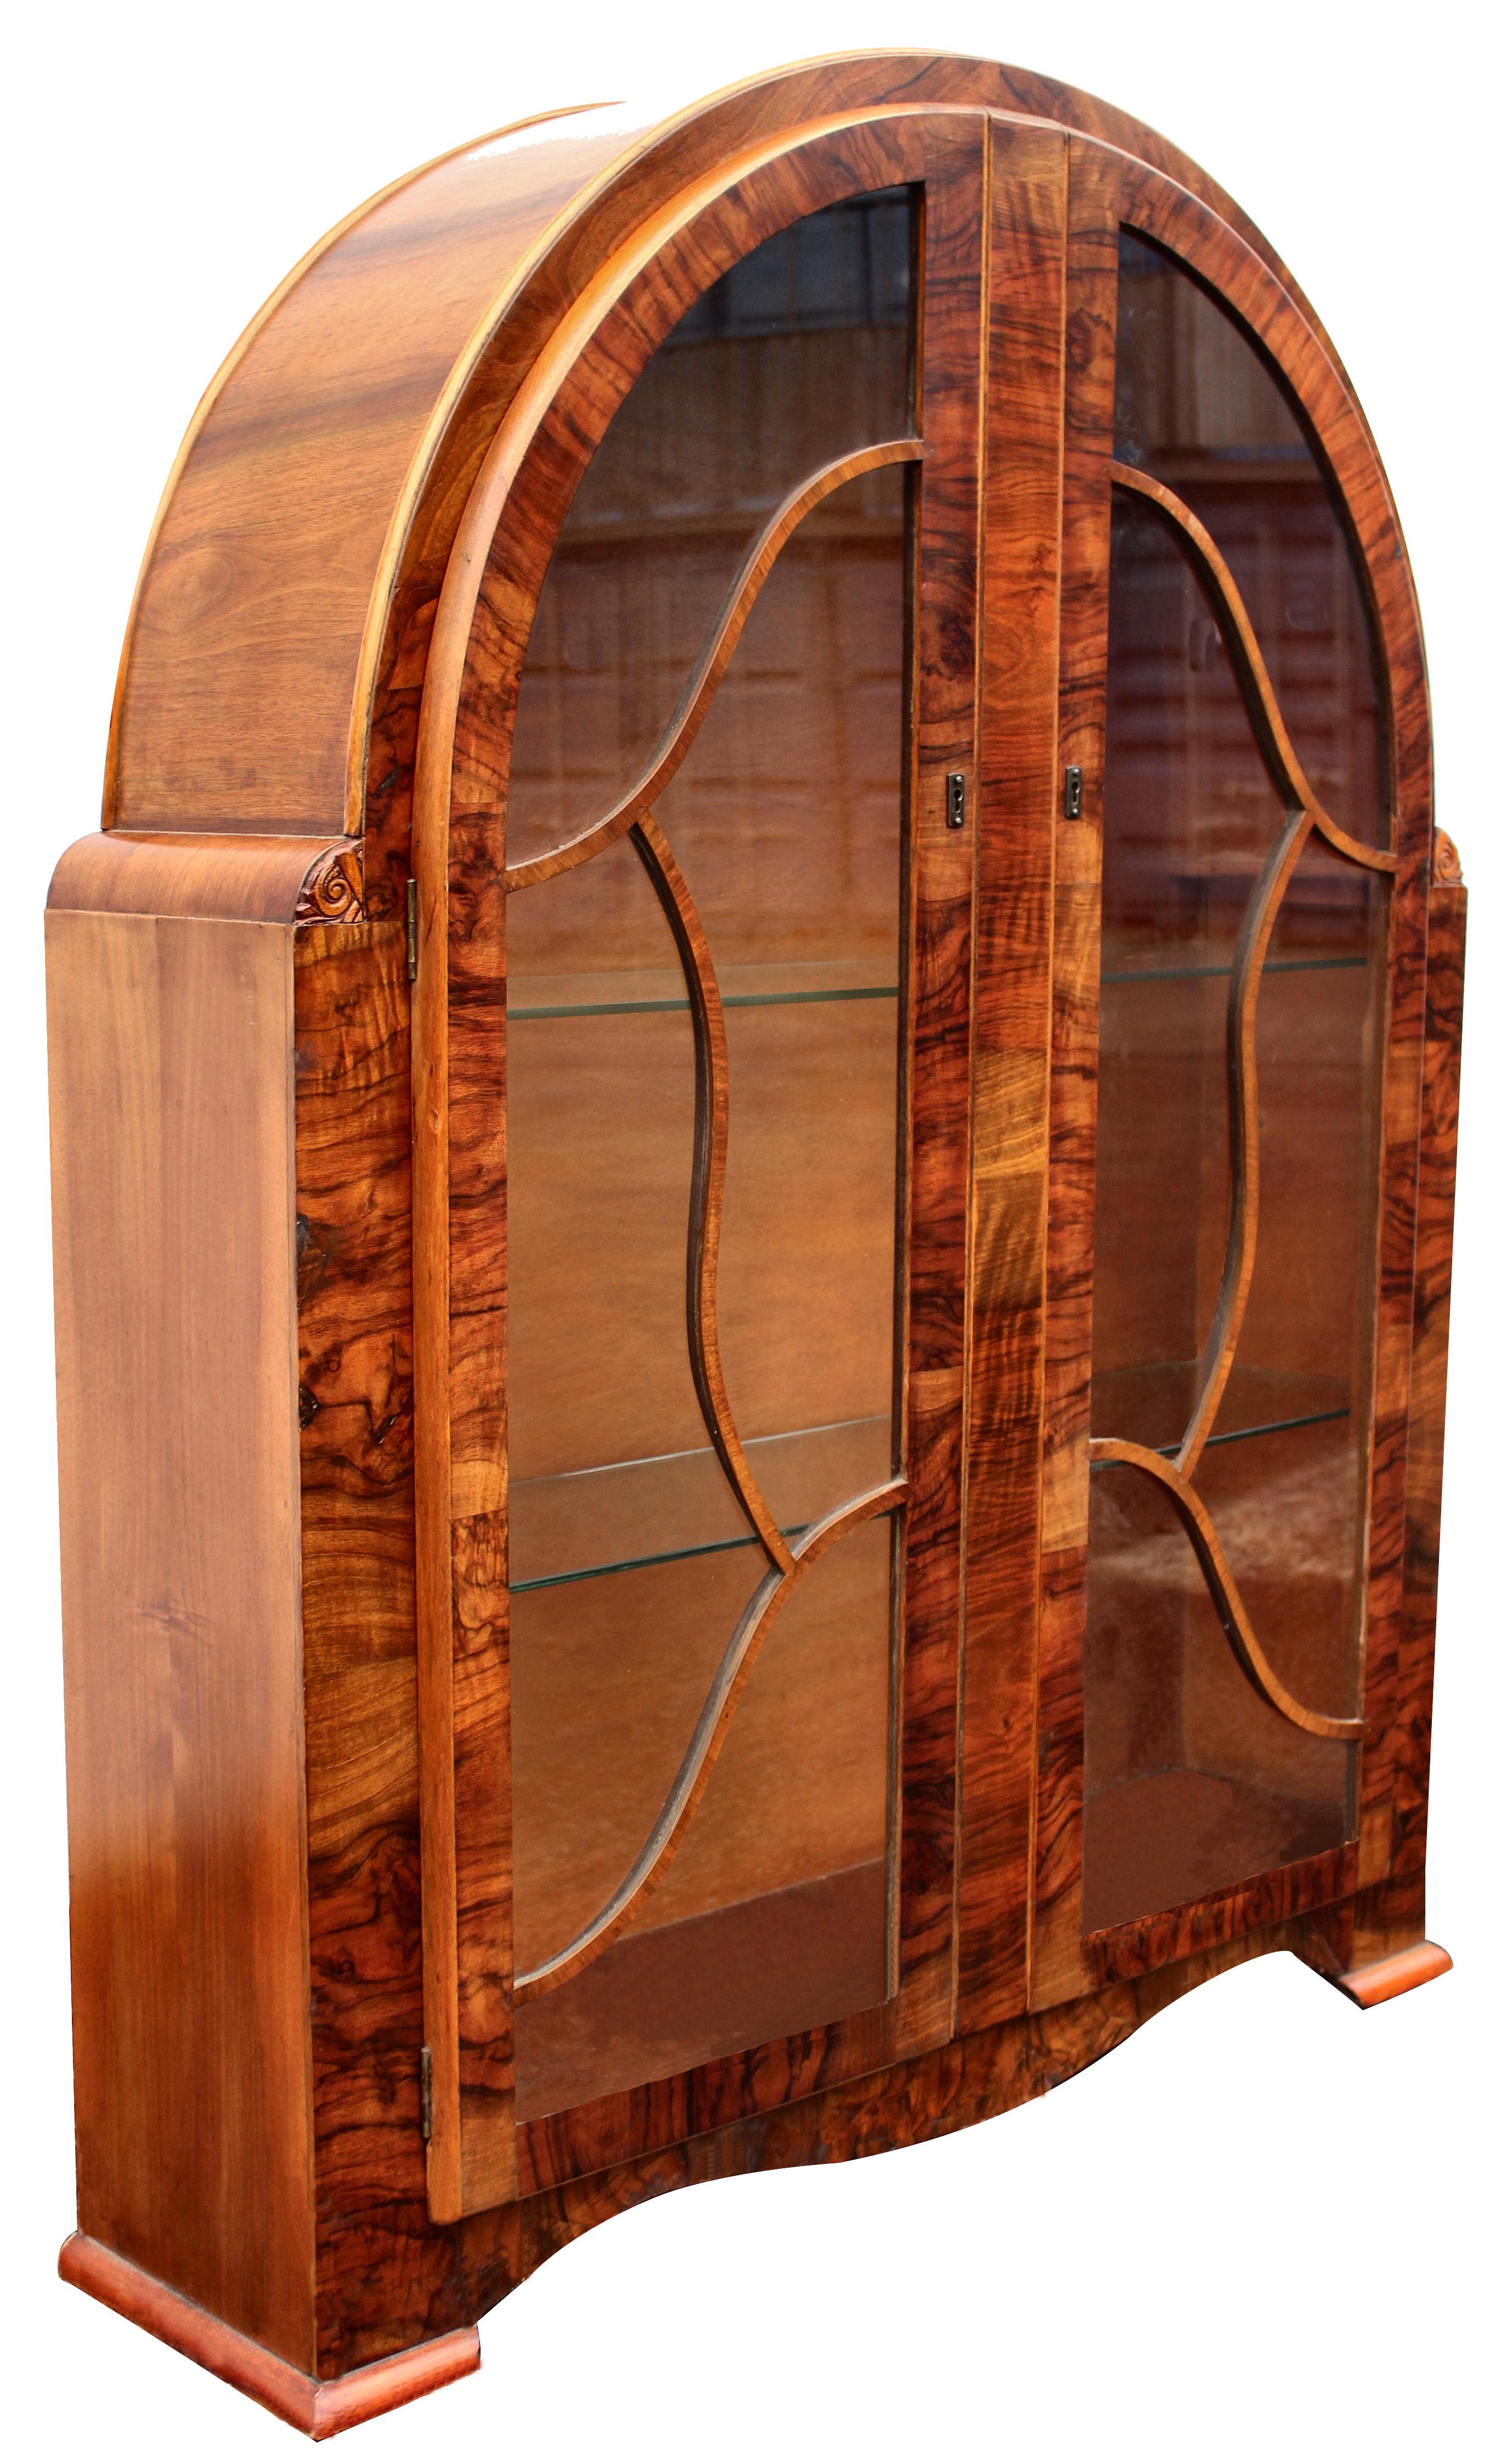 A truly beautiful 1930s Art Deco walnut cabinet of great proportions. The veneers on this cabinet are exceptional and look very impressive. The Arched top tapers down to a curvaceous base. The interior has two internal glass shelves and the very